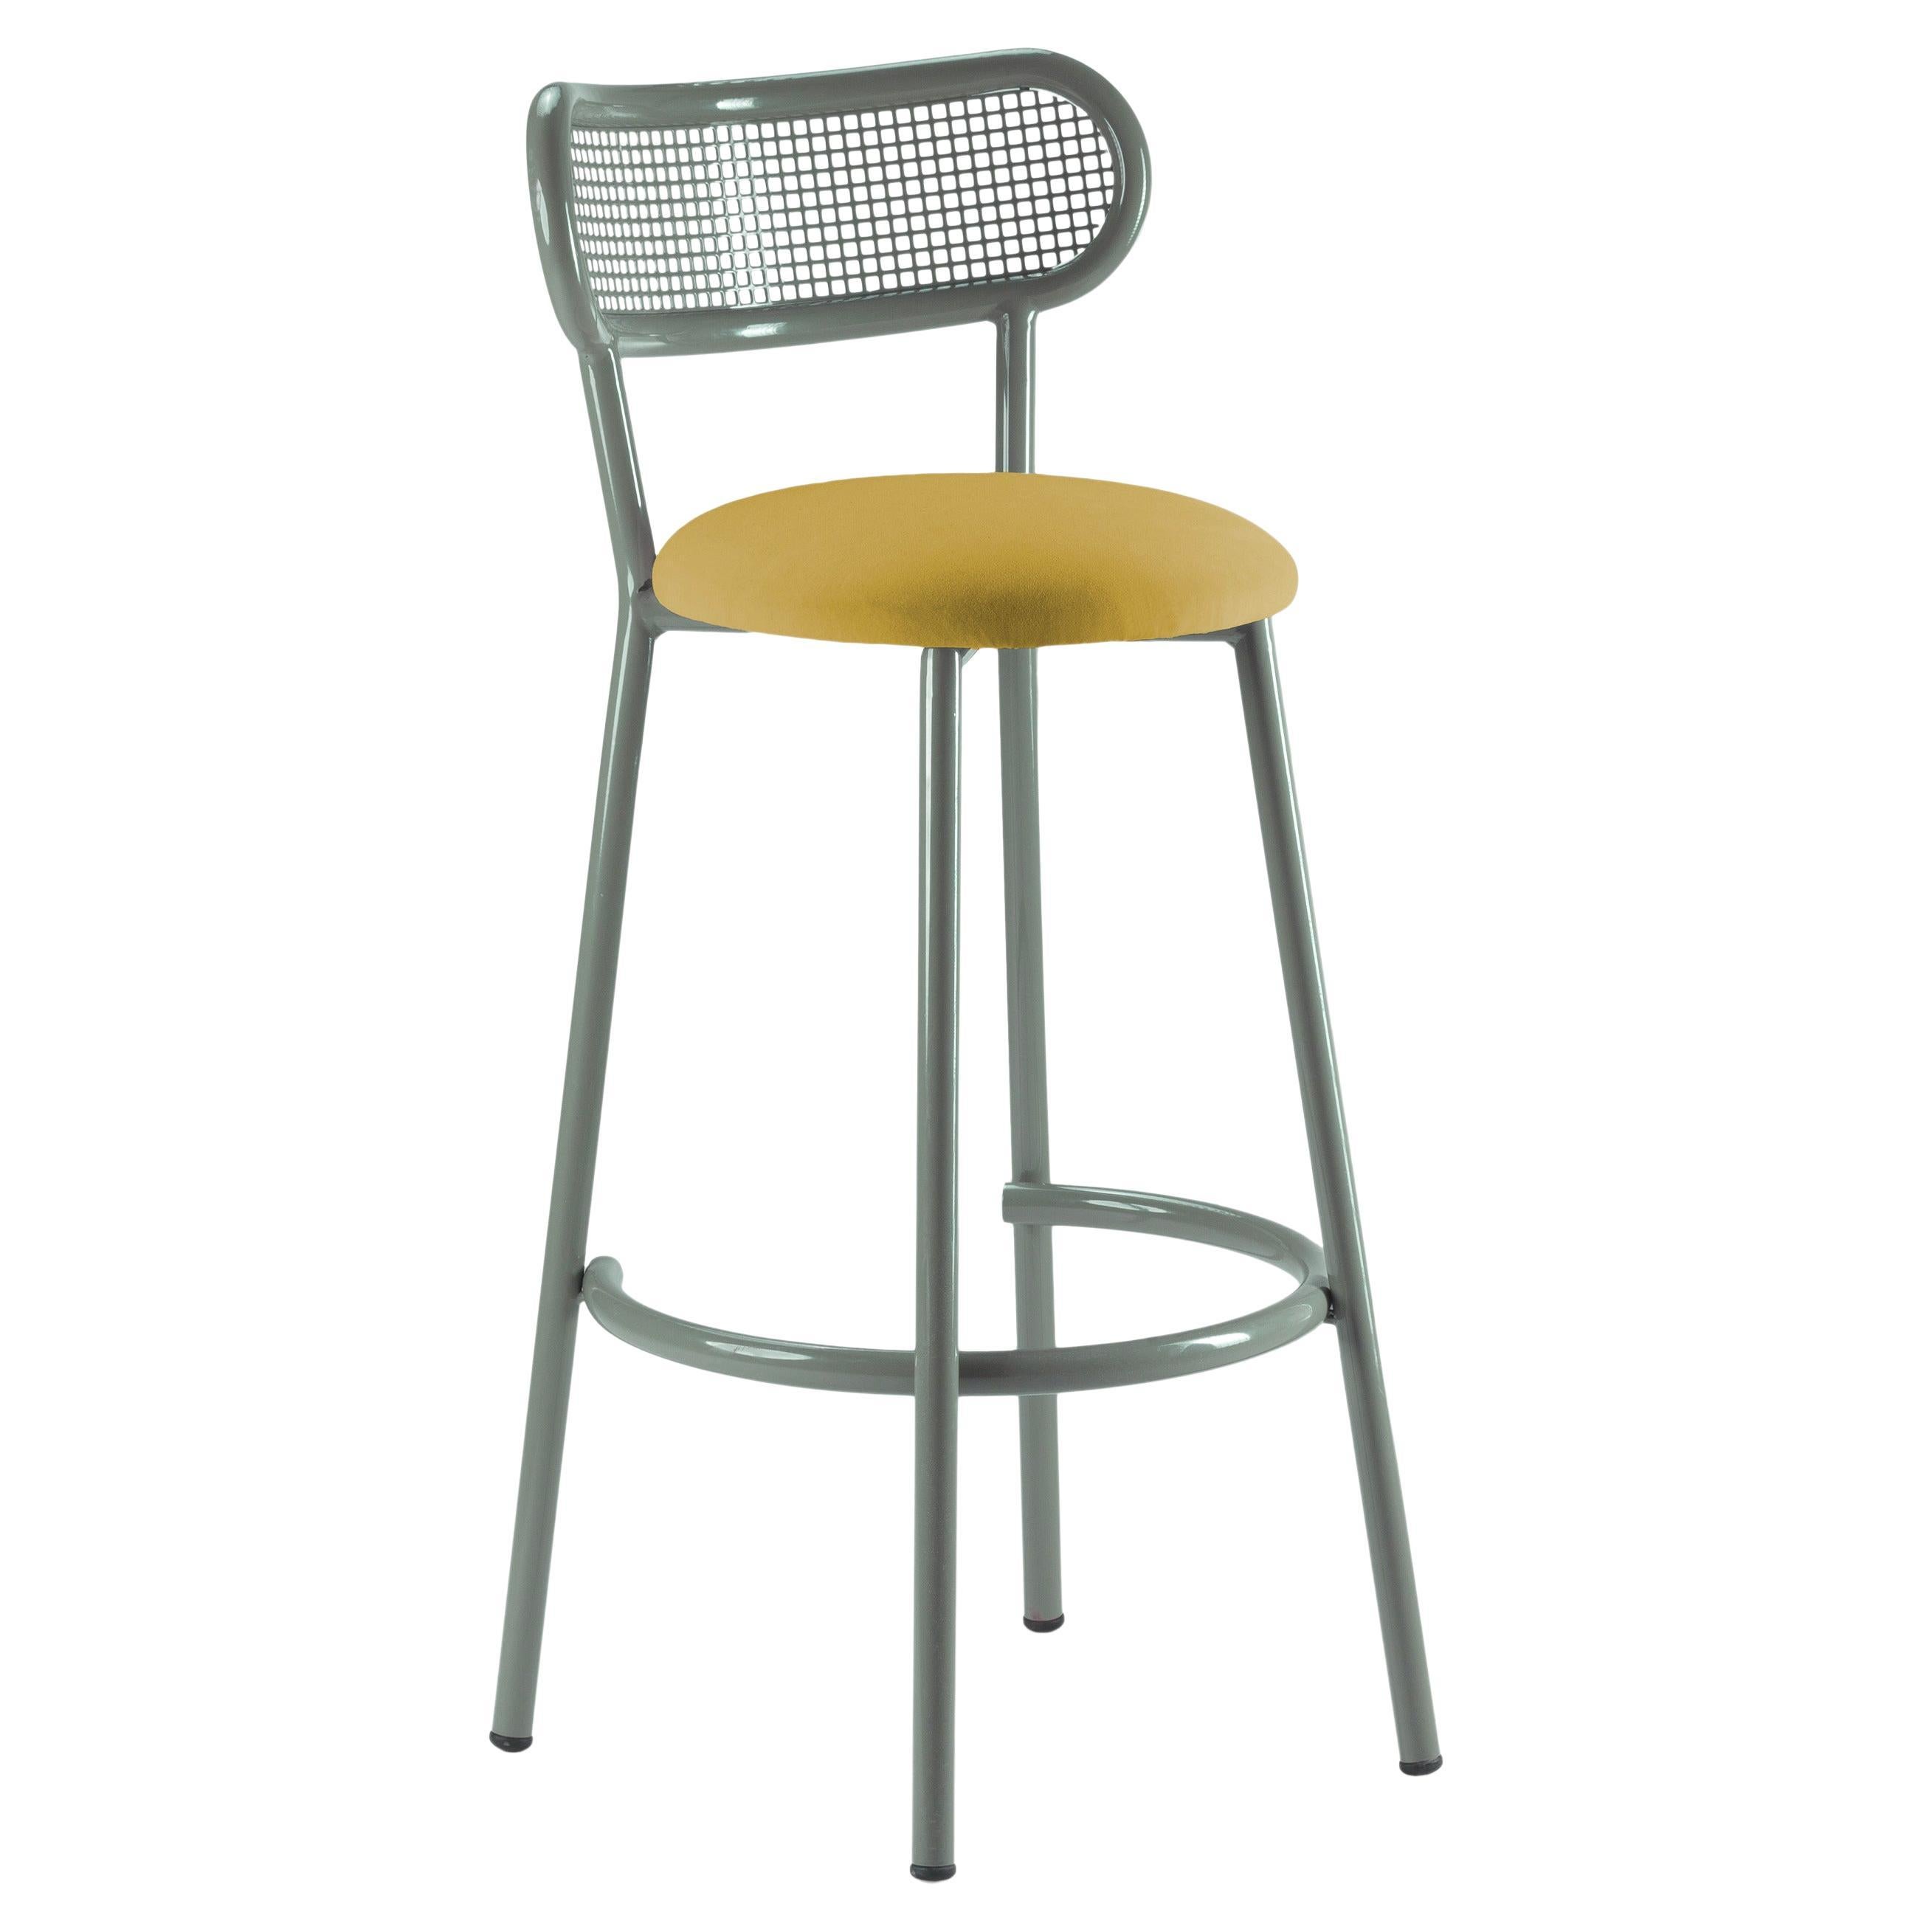 Louise Bar Chair with Sage Steel Structure, Perforated Steel Back and Upholstery For Sale